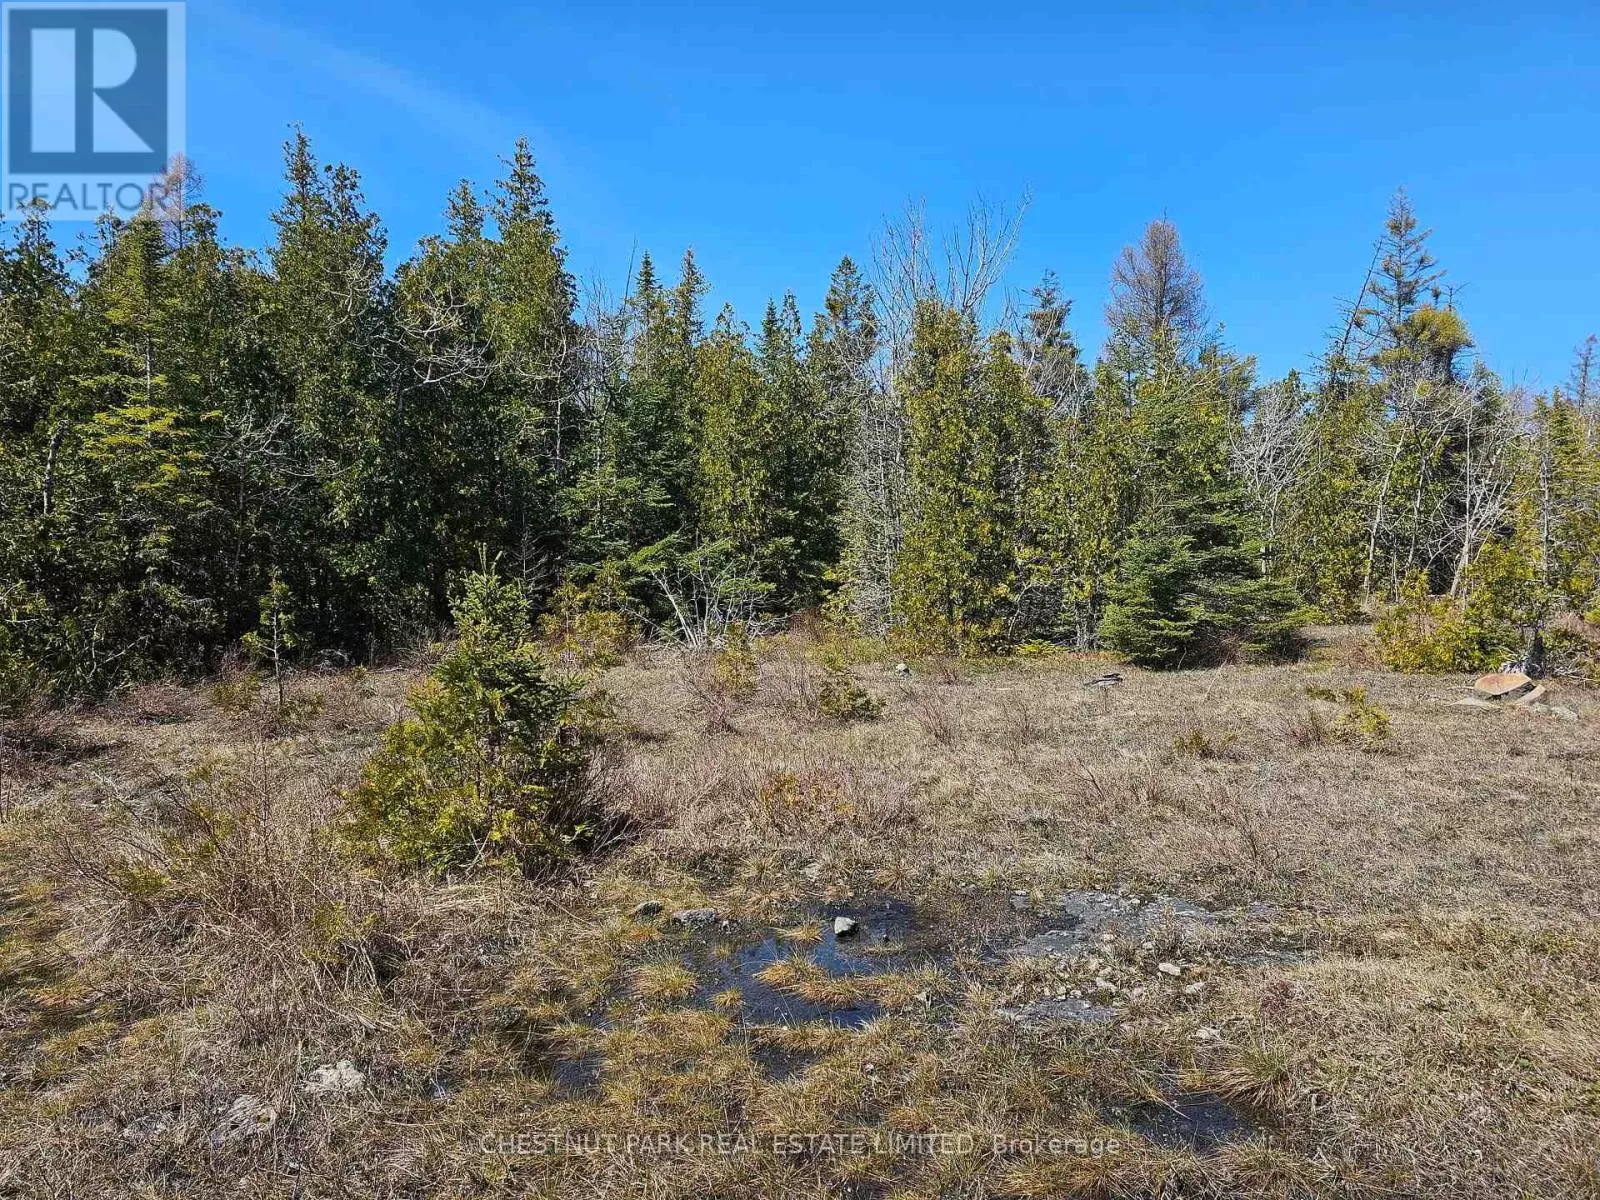 Lot 2 Spry Road, Northern Bruce Peninsula, Ontario N0H 1W0